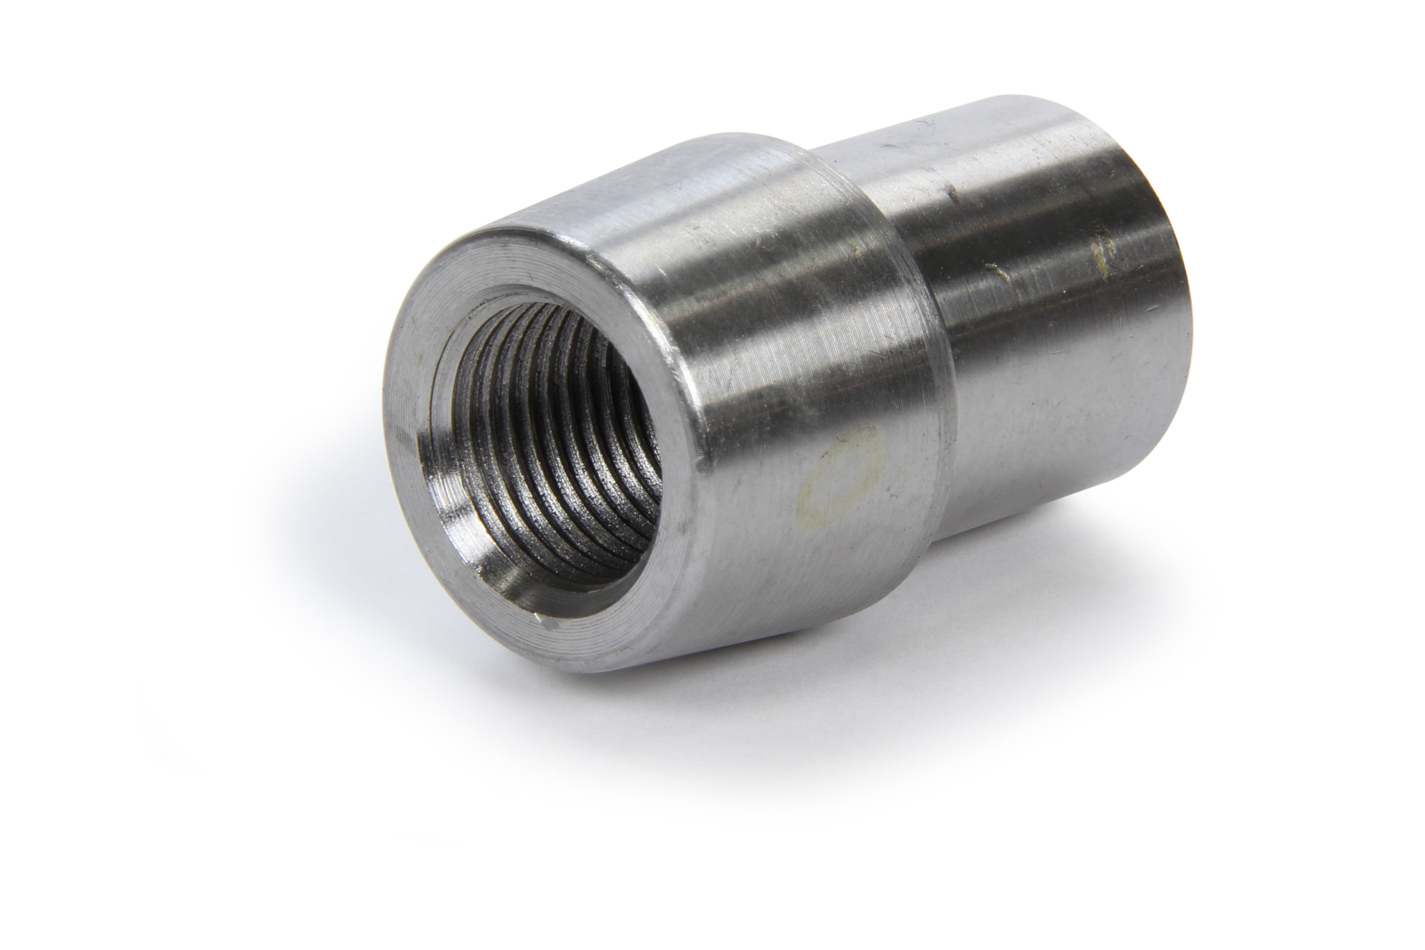 FK Rod Ends 2107 Tube End, Weld-On, Threaded, 5/8-18 in Right Hand Female Thread, 1 in Tube, 0.083 in Tube Wall, Chromoly, Natural, Each